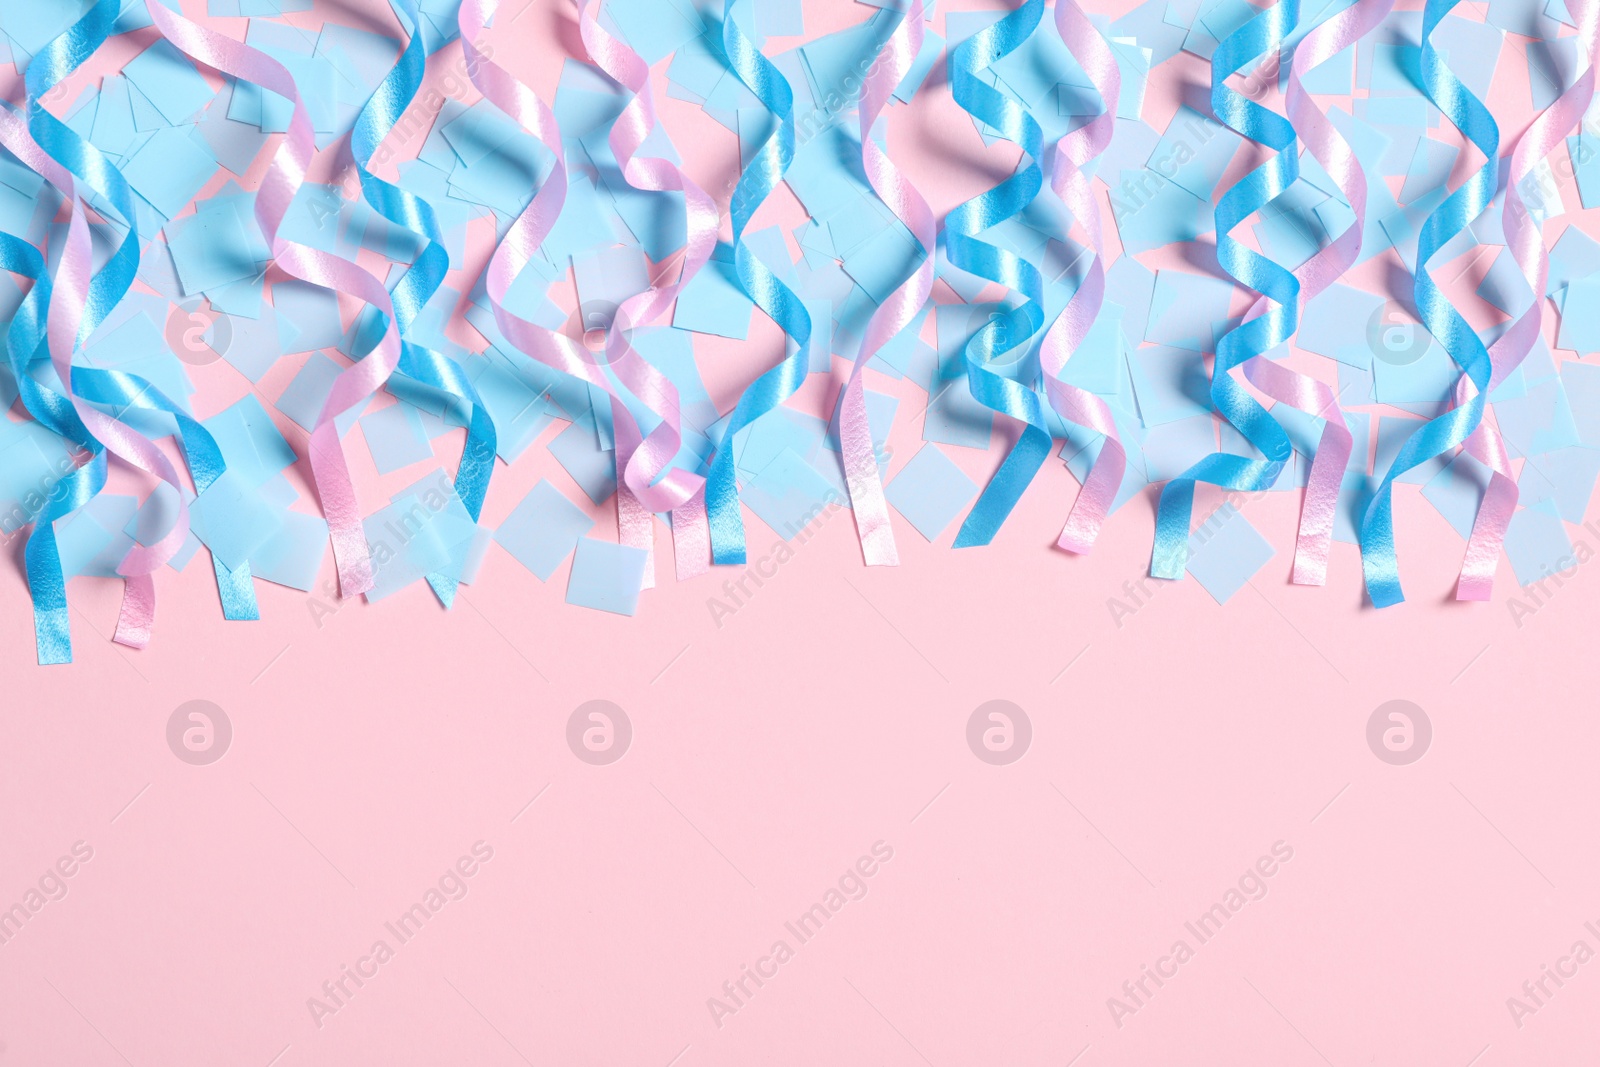 Photo of Shiny serpentine streamers and blue confetti on pink background, flat lay. Space for text